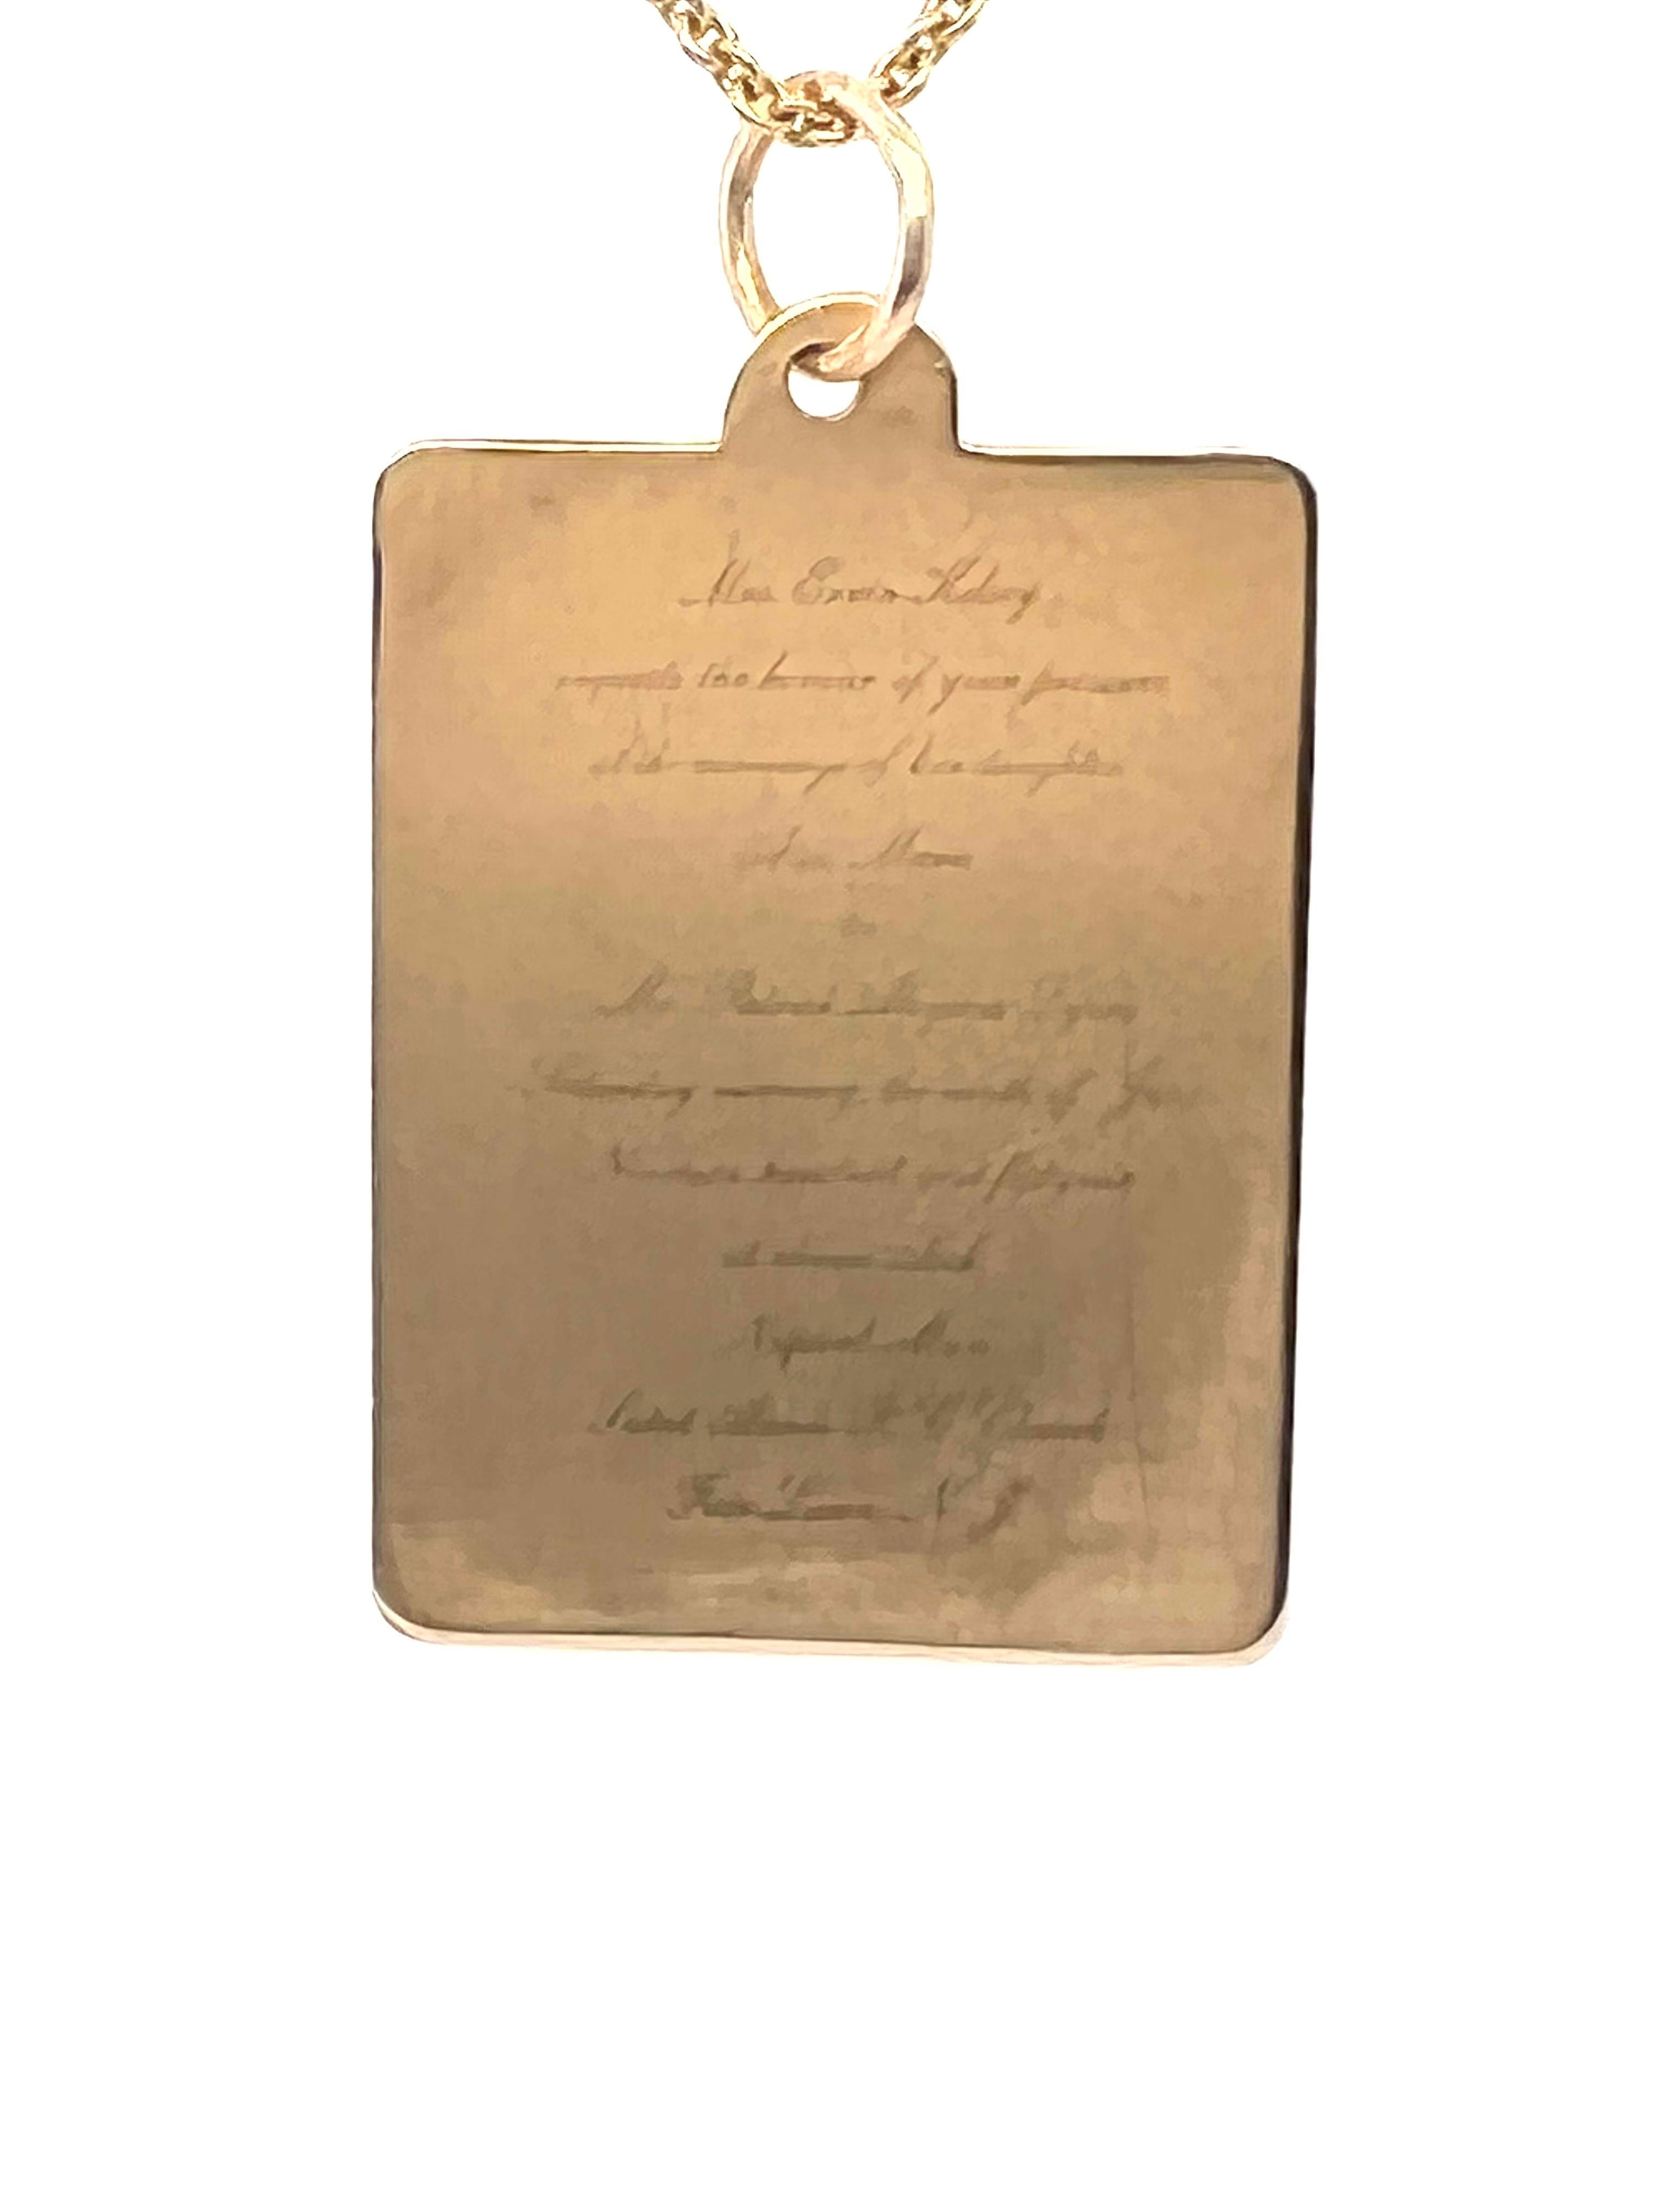 Charming charm:  A wedding invitation, with fine engraving:   